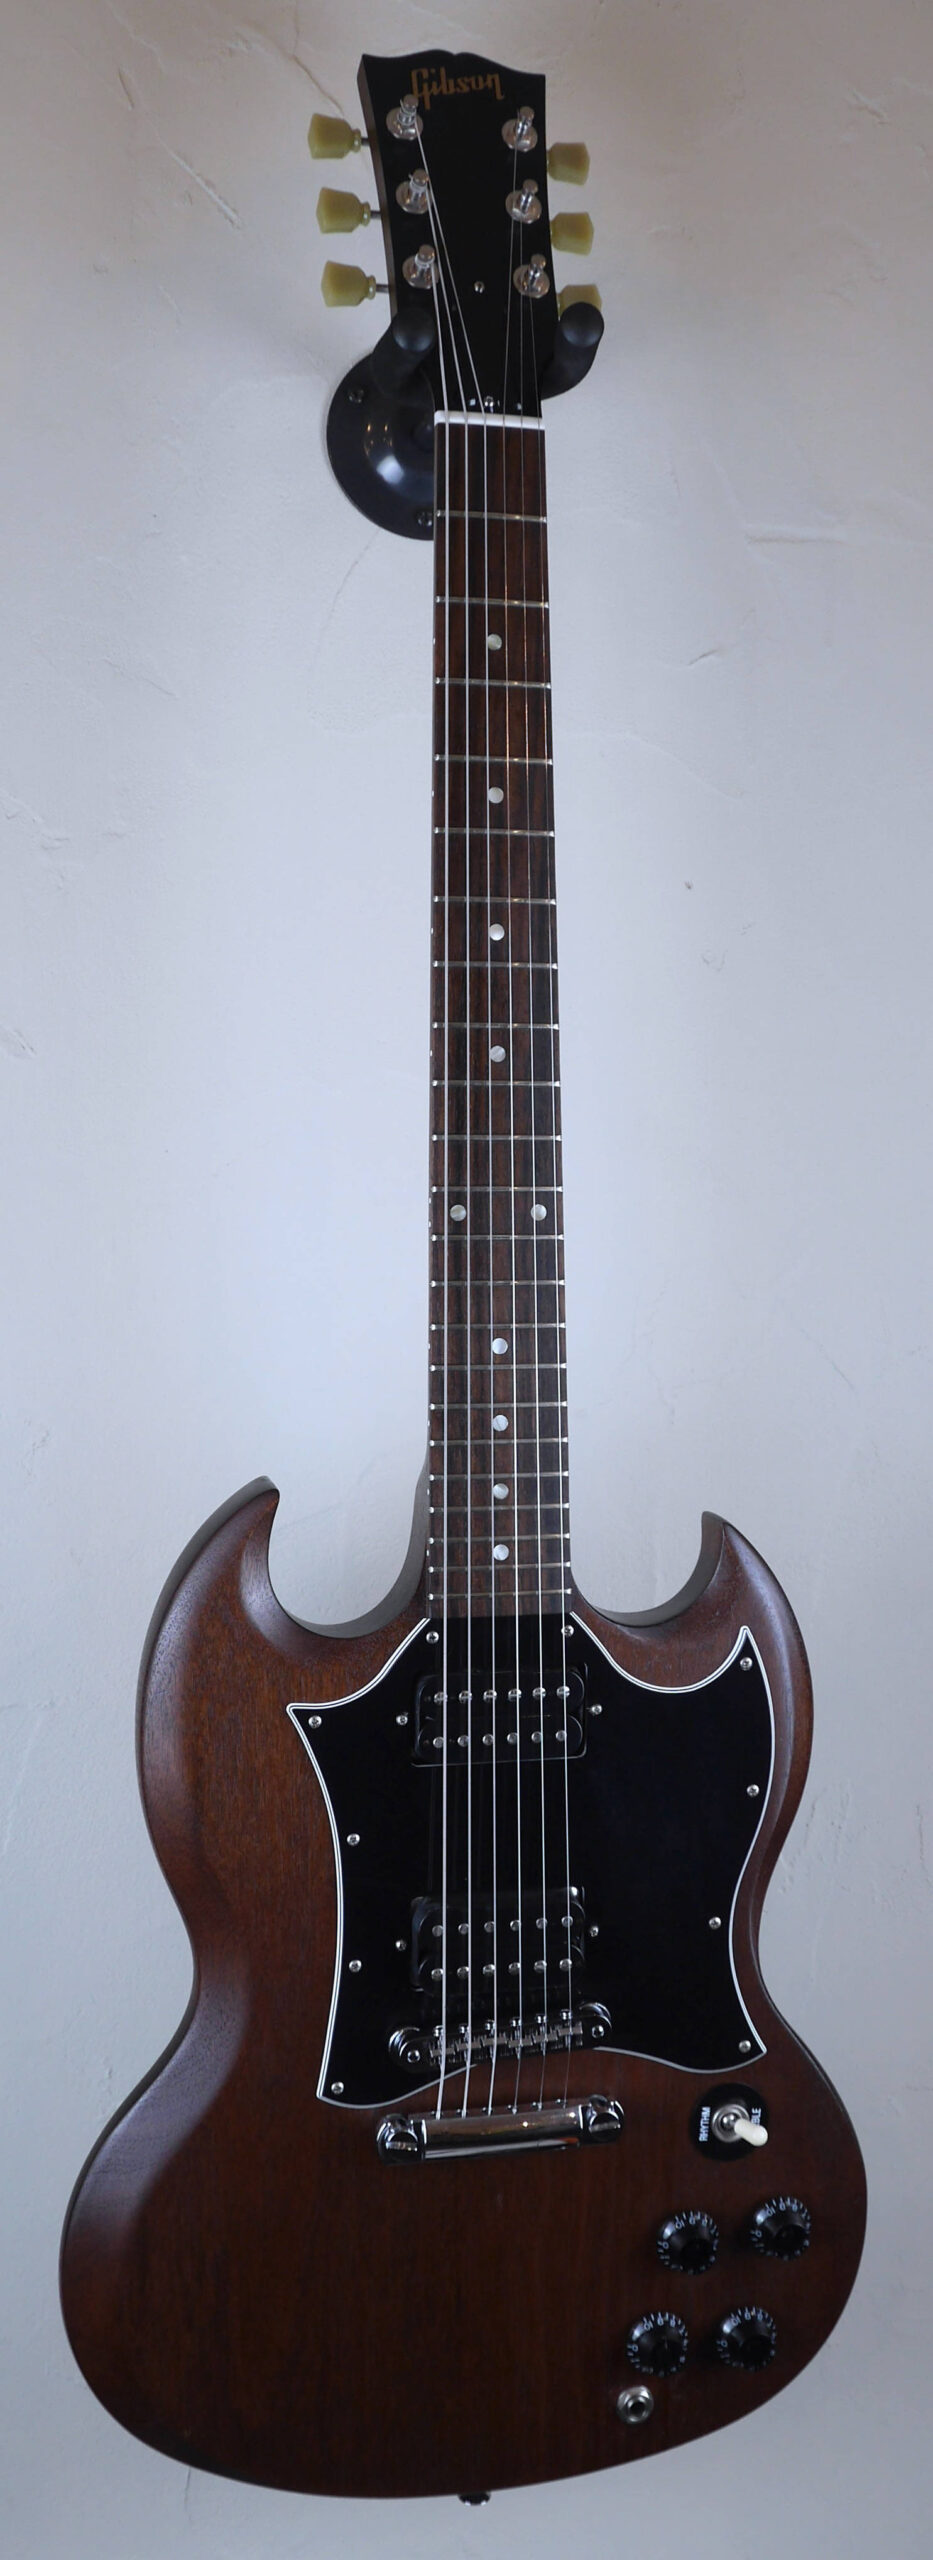 Gibson SG Special Faded 2010 Worn Brown 1